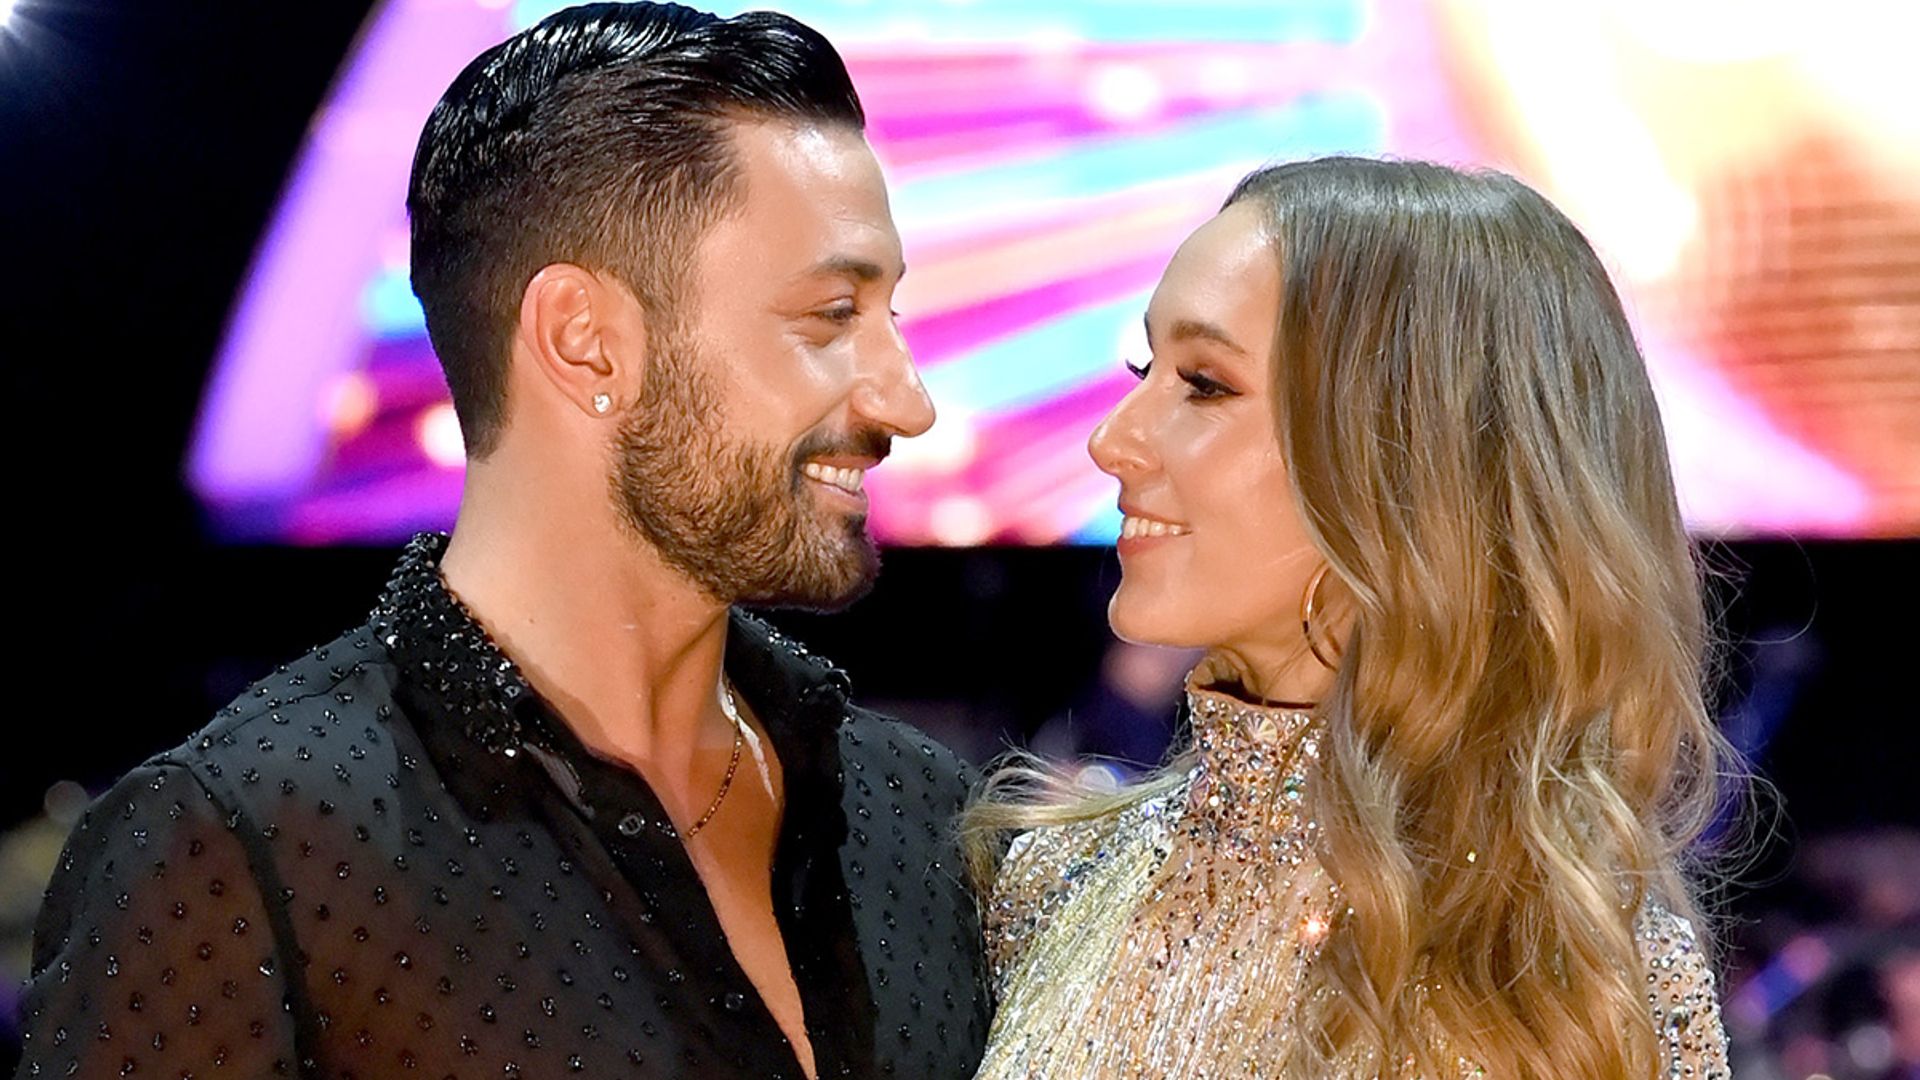 Strictly's Giovanni Pernice shares moving video with Rose Ayling-Ellis